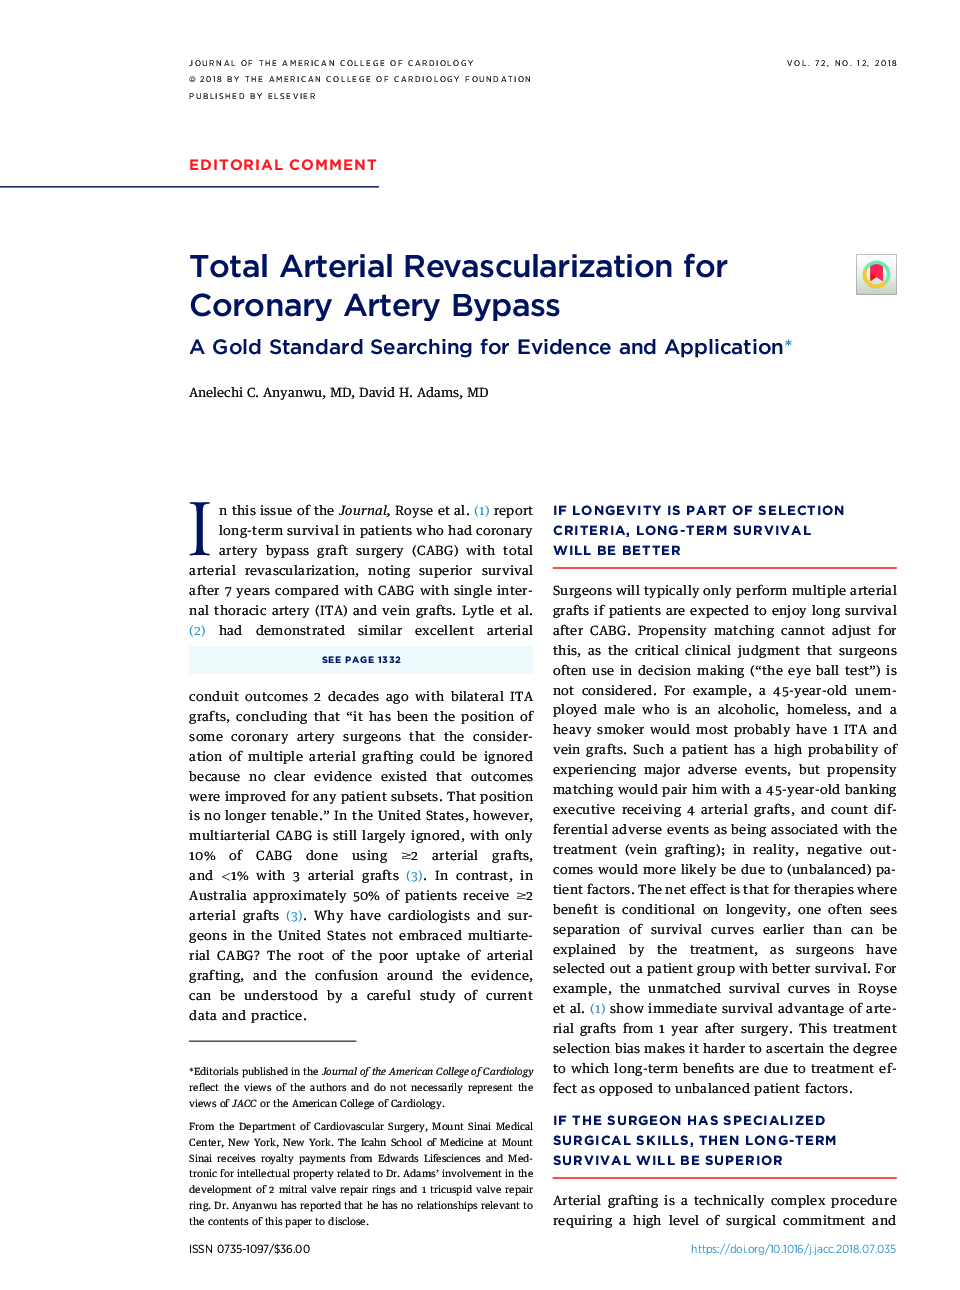 Total Arterial Revascularization for Coronary Artery Bypass